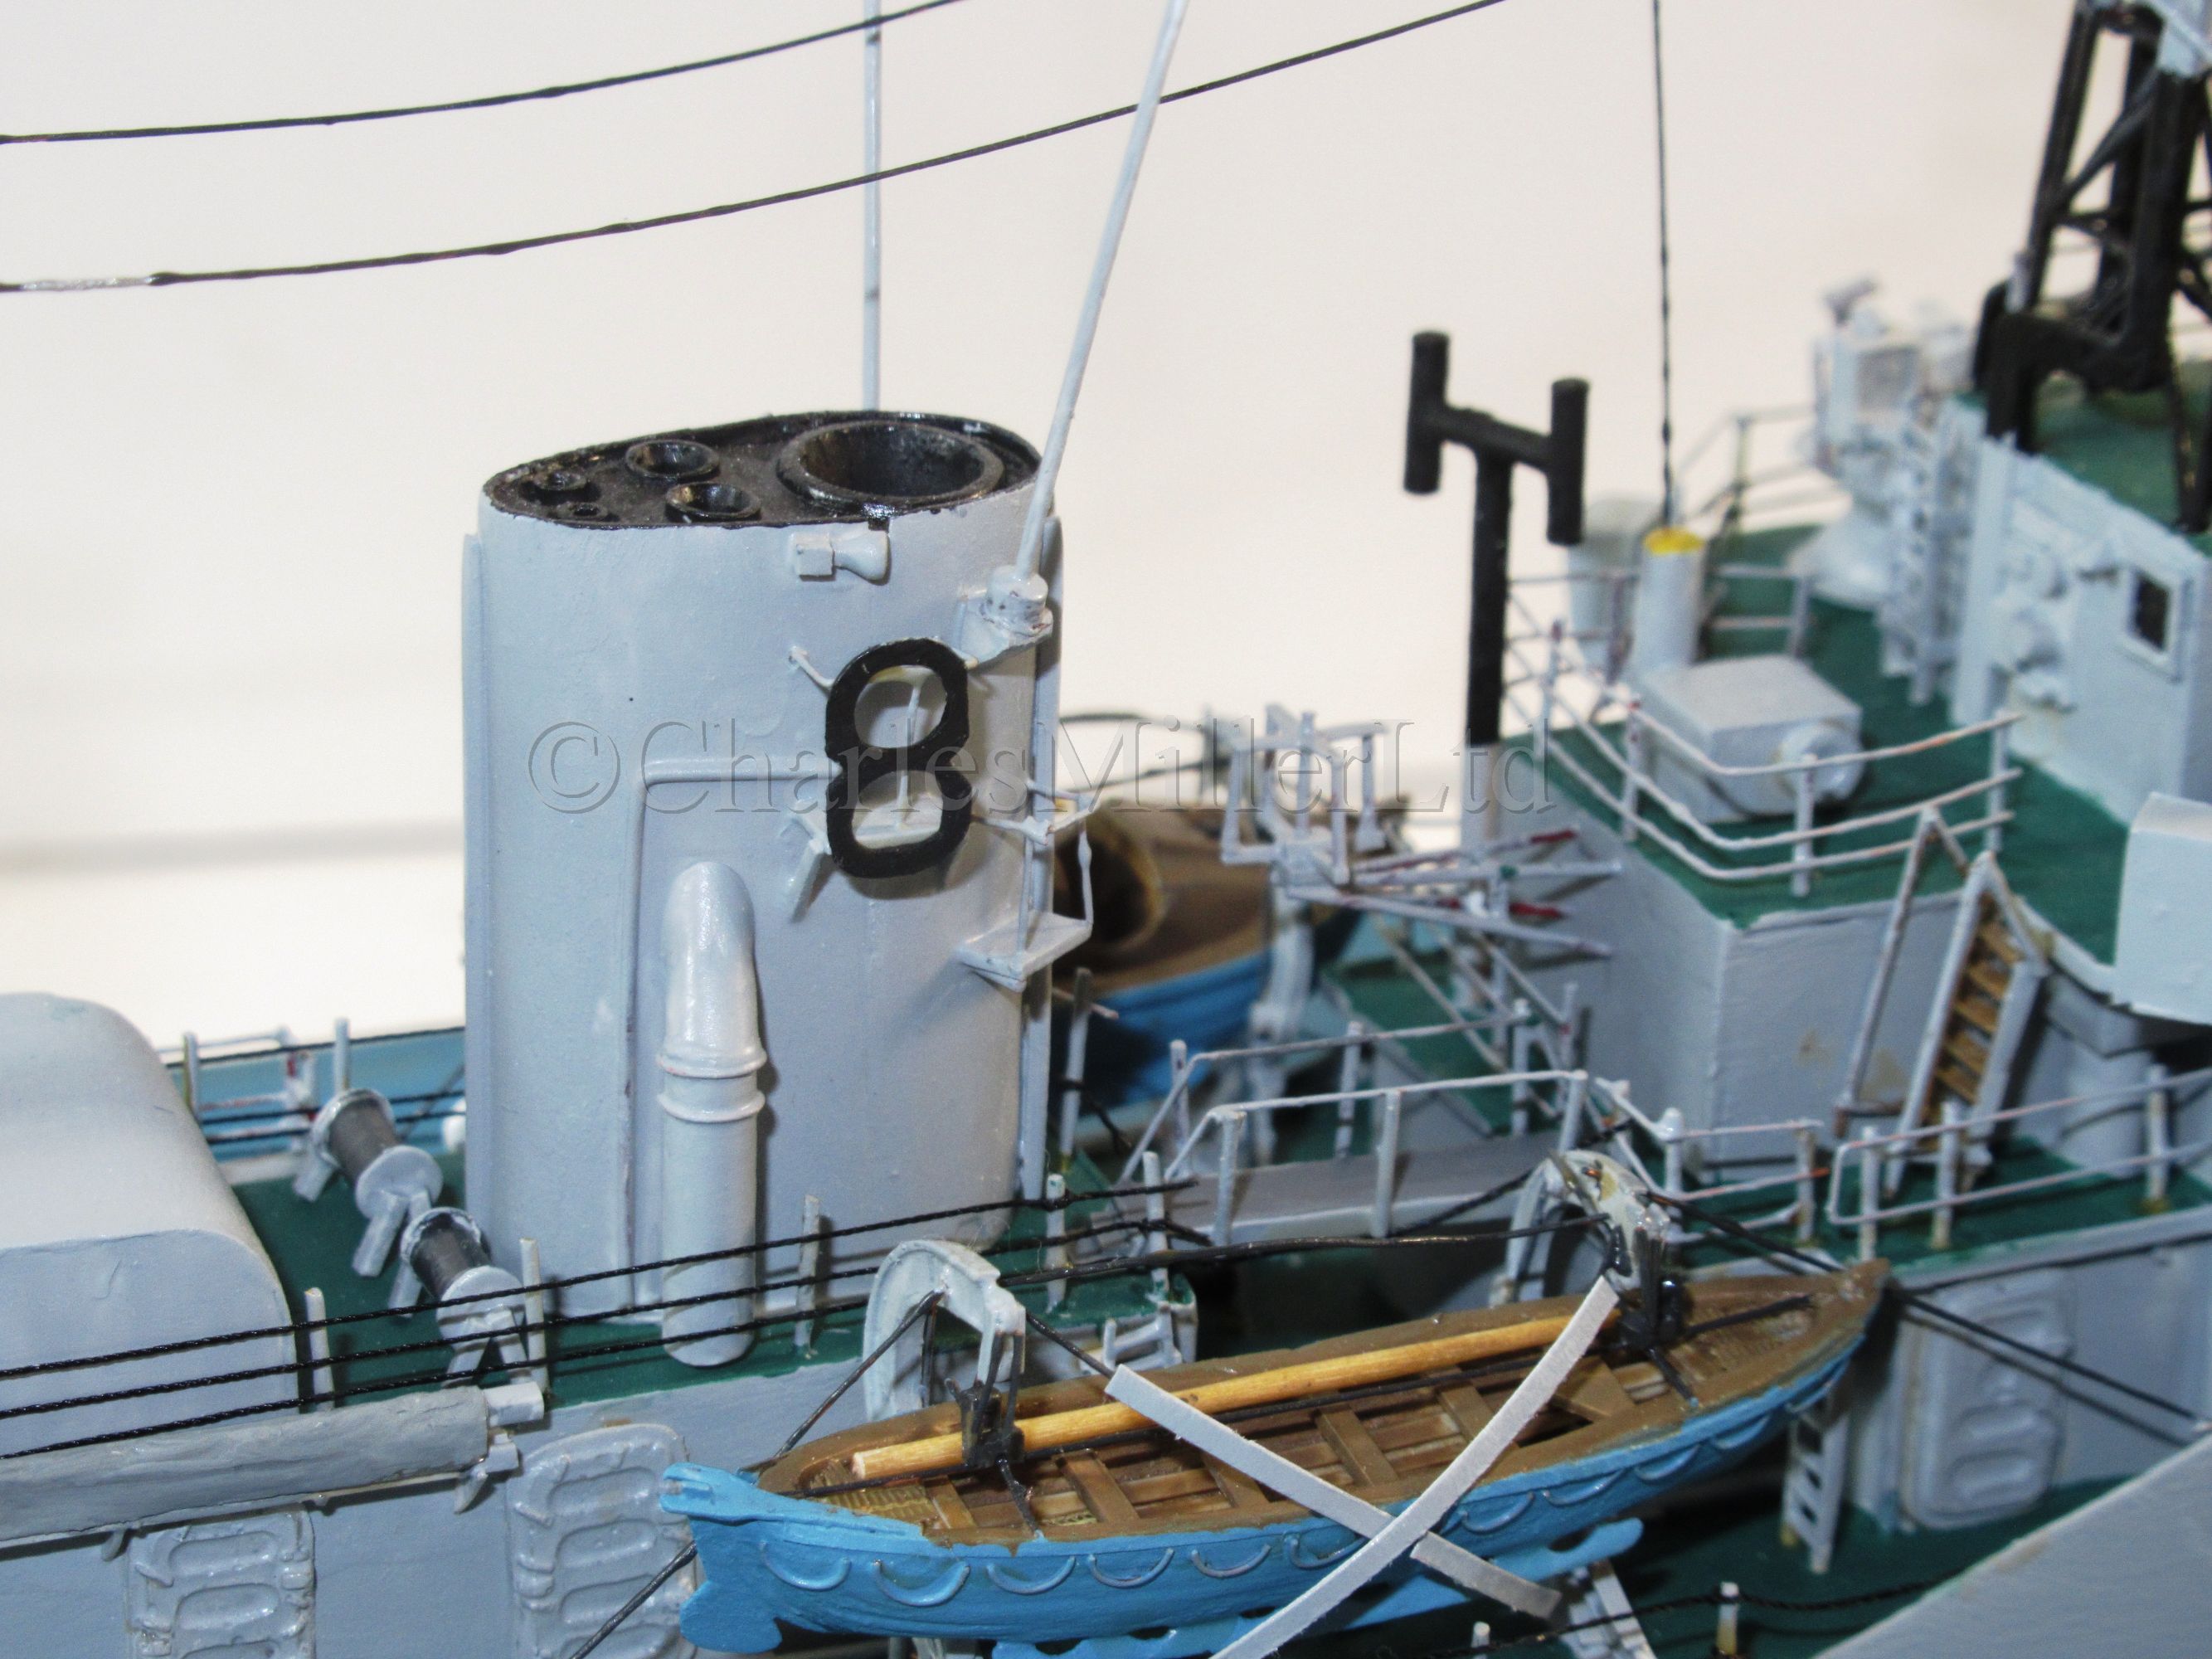 A 1:192 WATERLINE MODEL FOR THE TYPE 14 BLACKWOOD CLASS FRIGATE HMS GRAFTON (F51), AS FITTED IN - Image 5 of 14